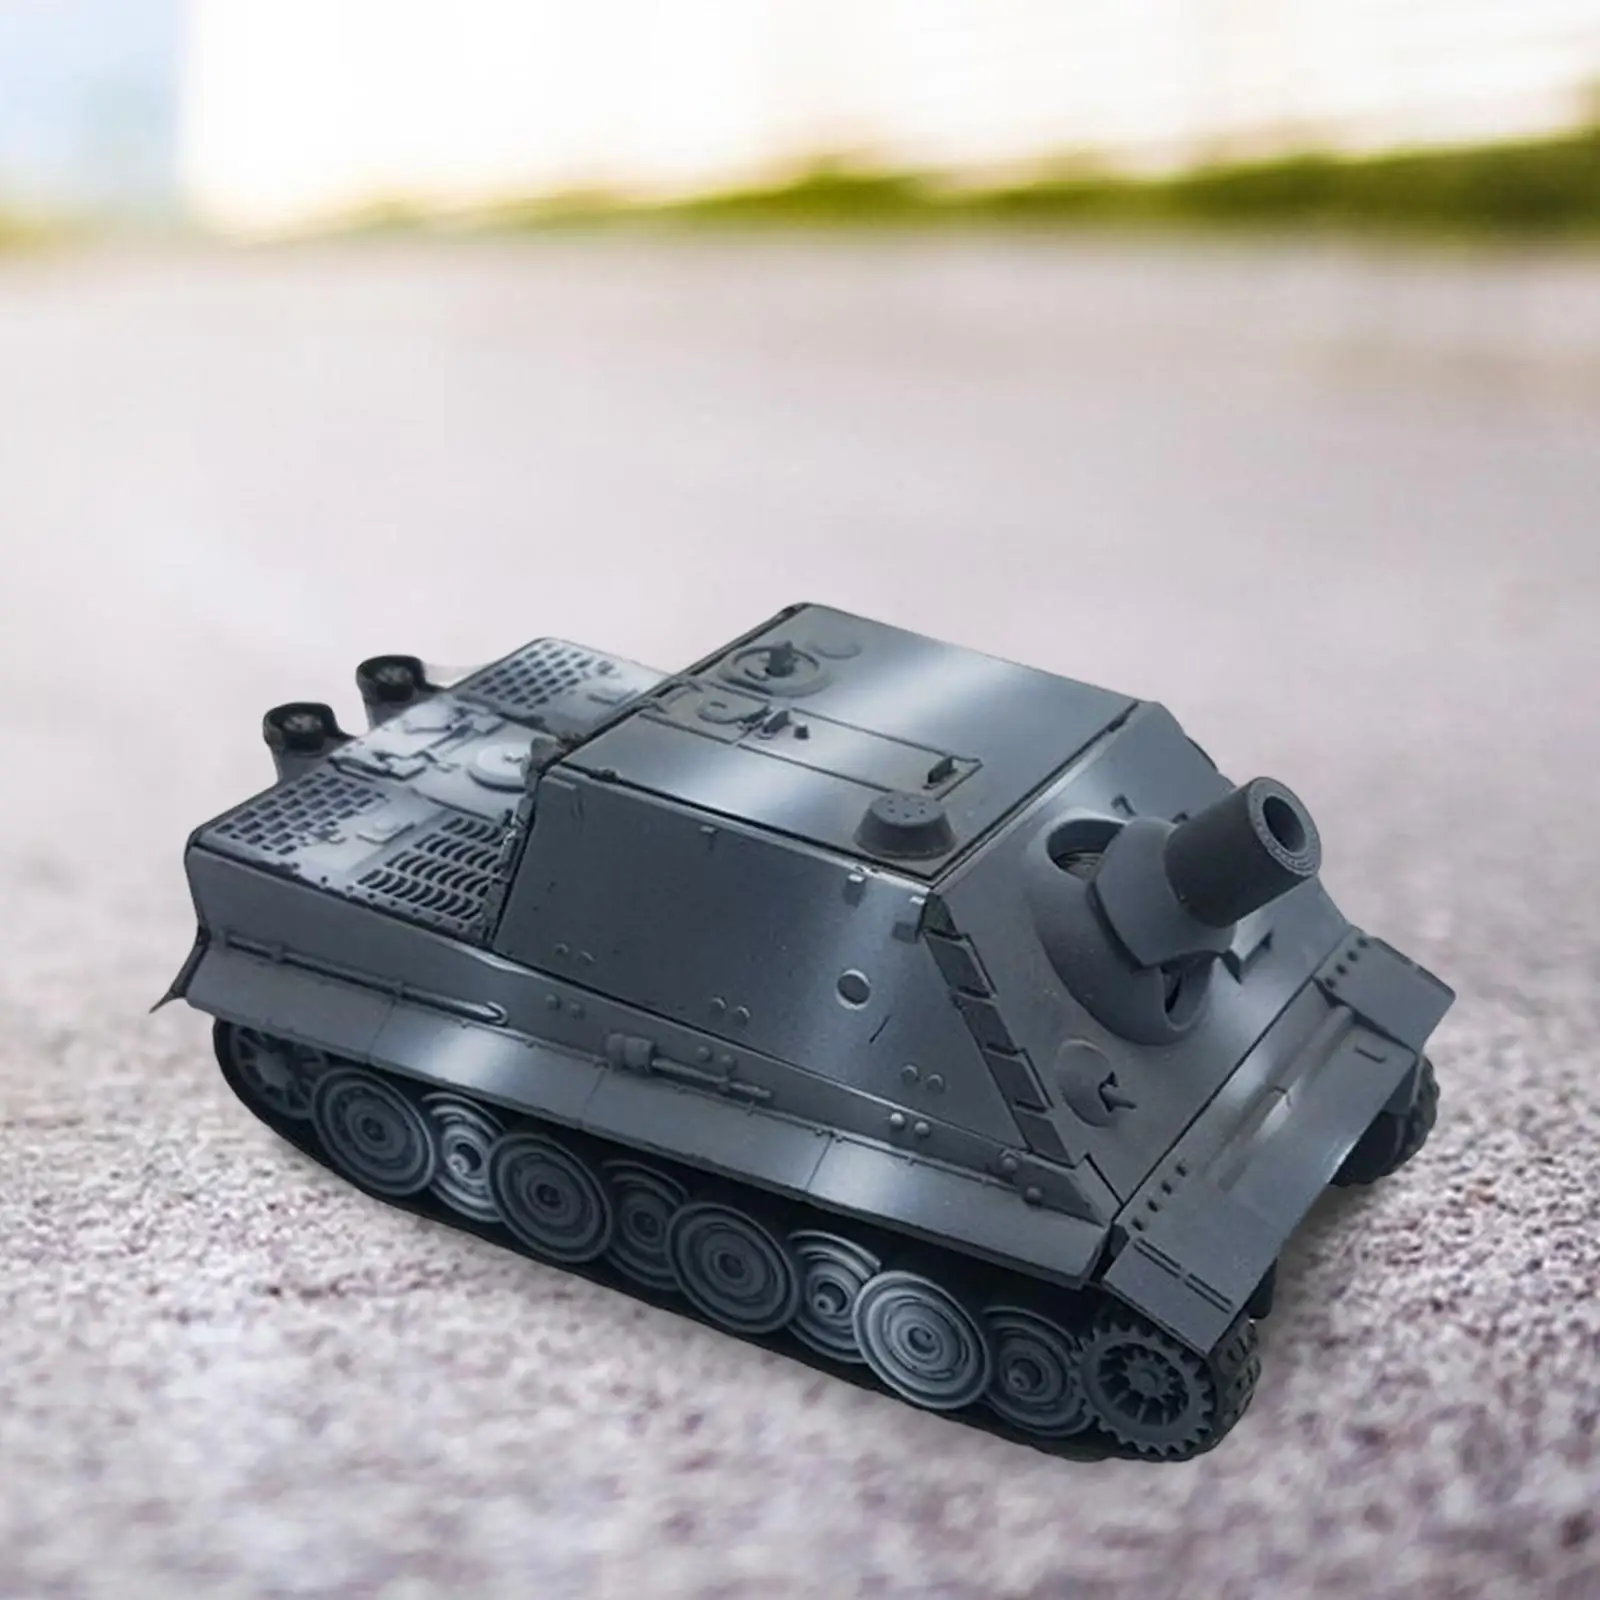 4D Assemble Tank Kits Vehicle Model Toy for Hotel Desktop Birthday Gifts